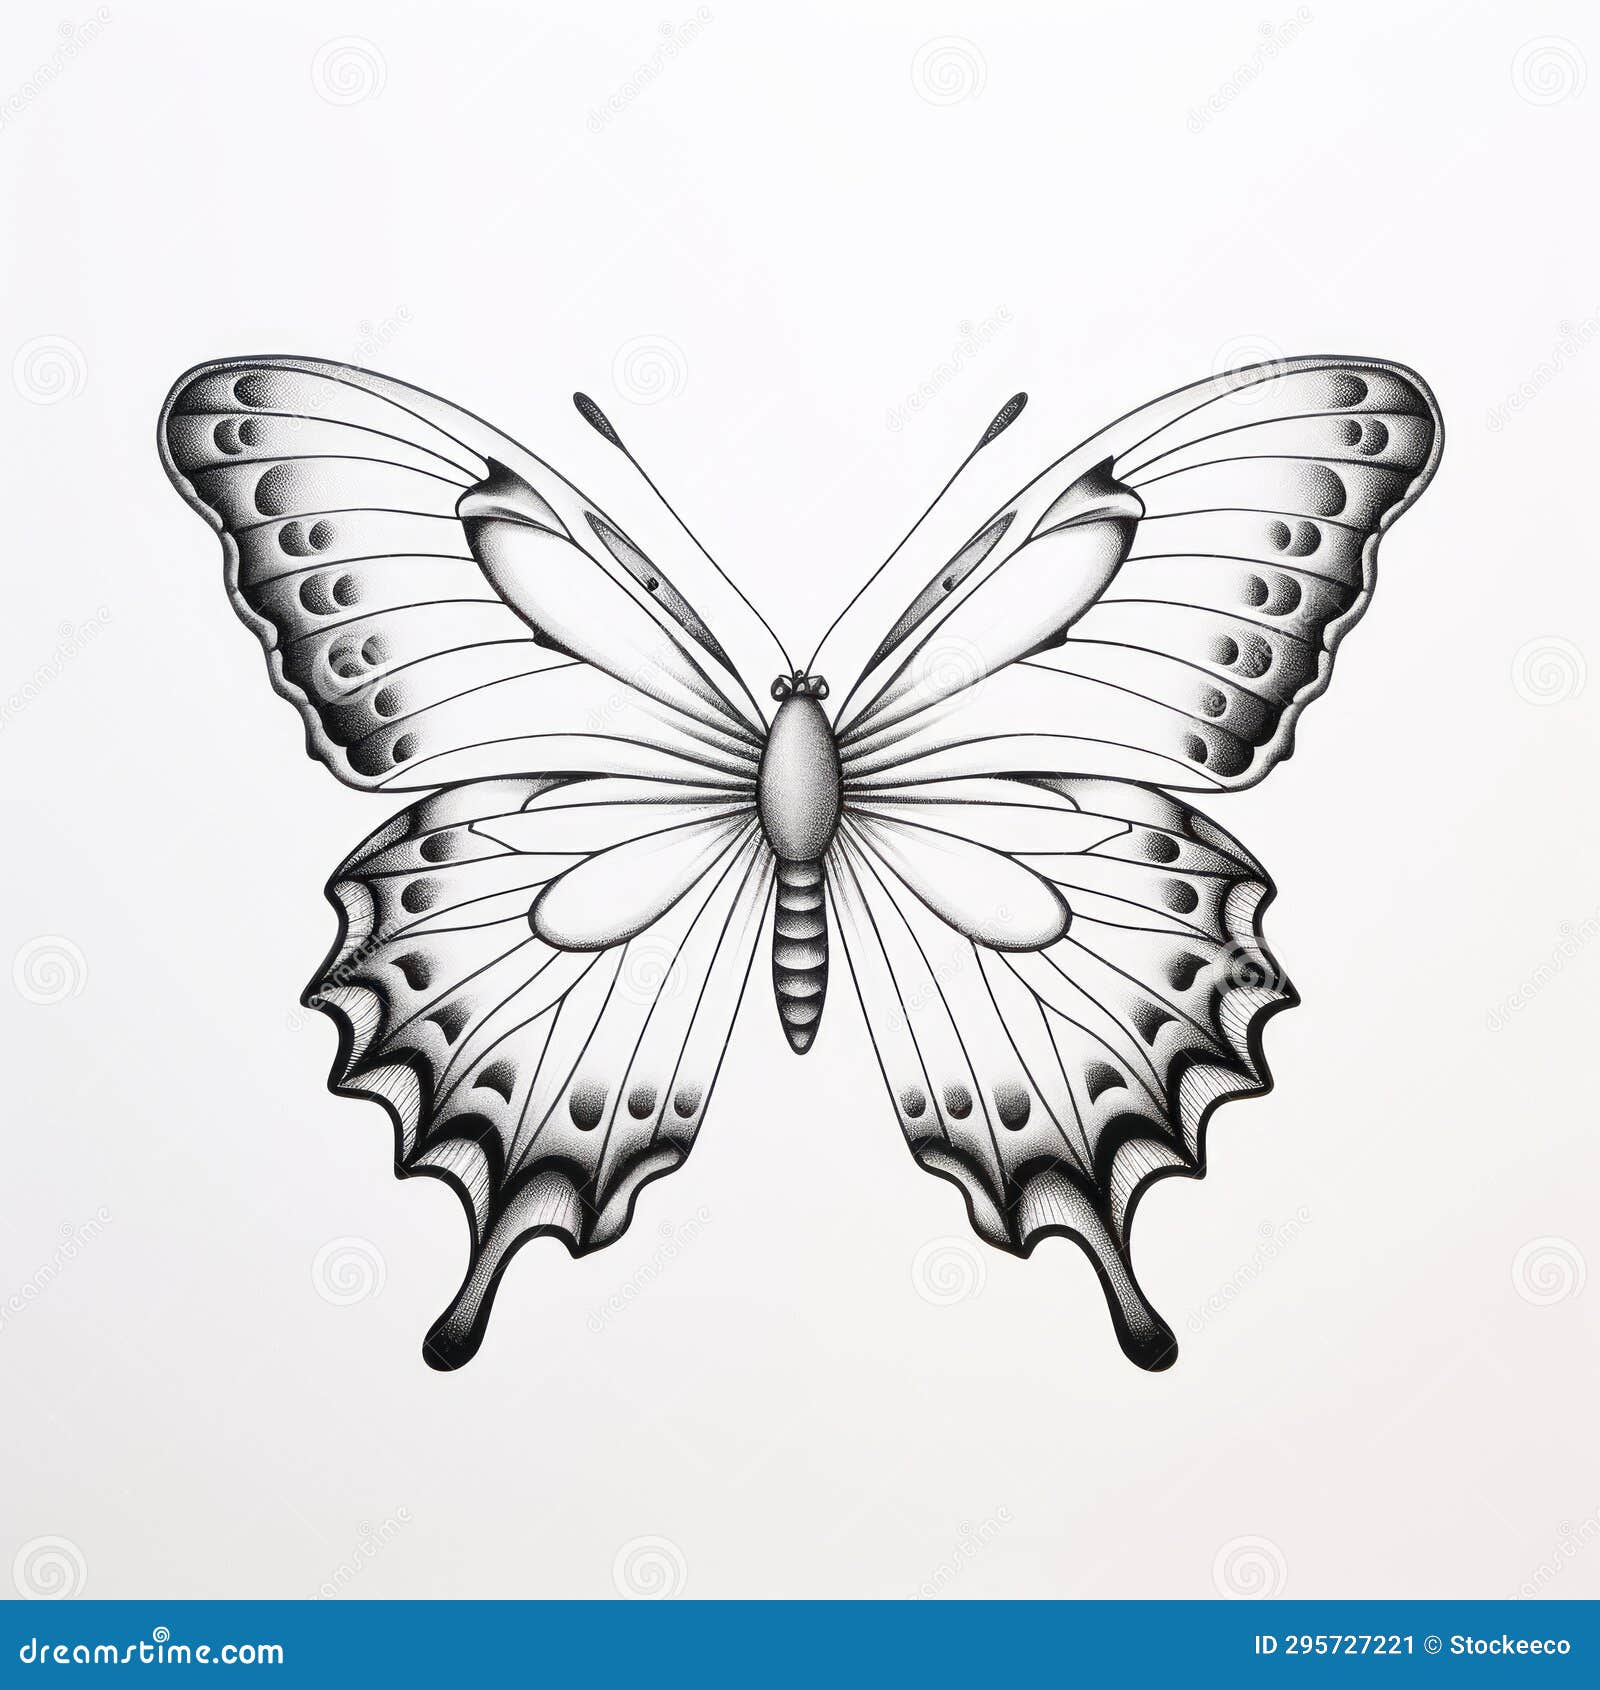 Black and White Butterfly Vector Vintage Poster Design with Elegant ...